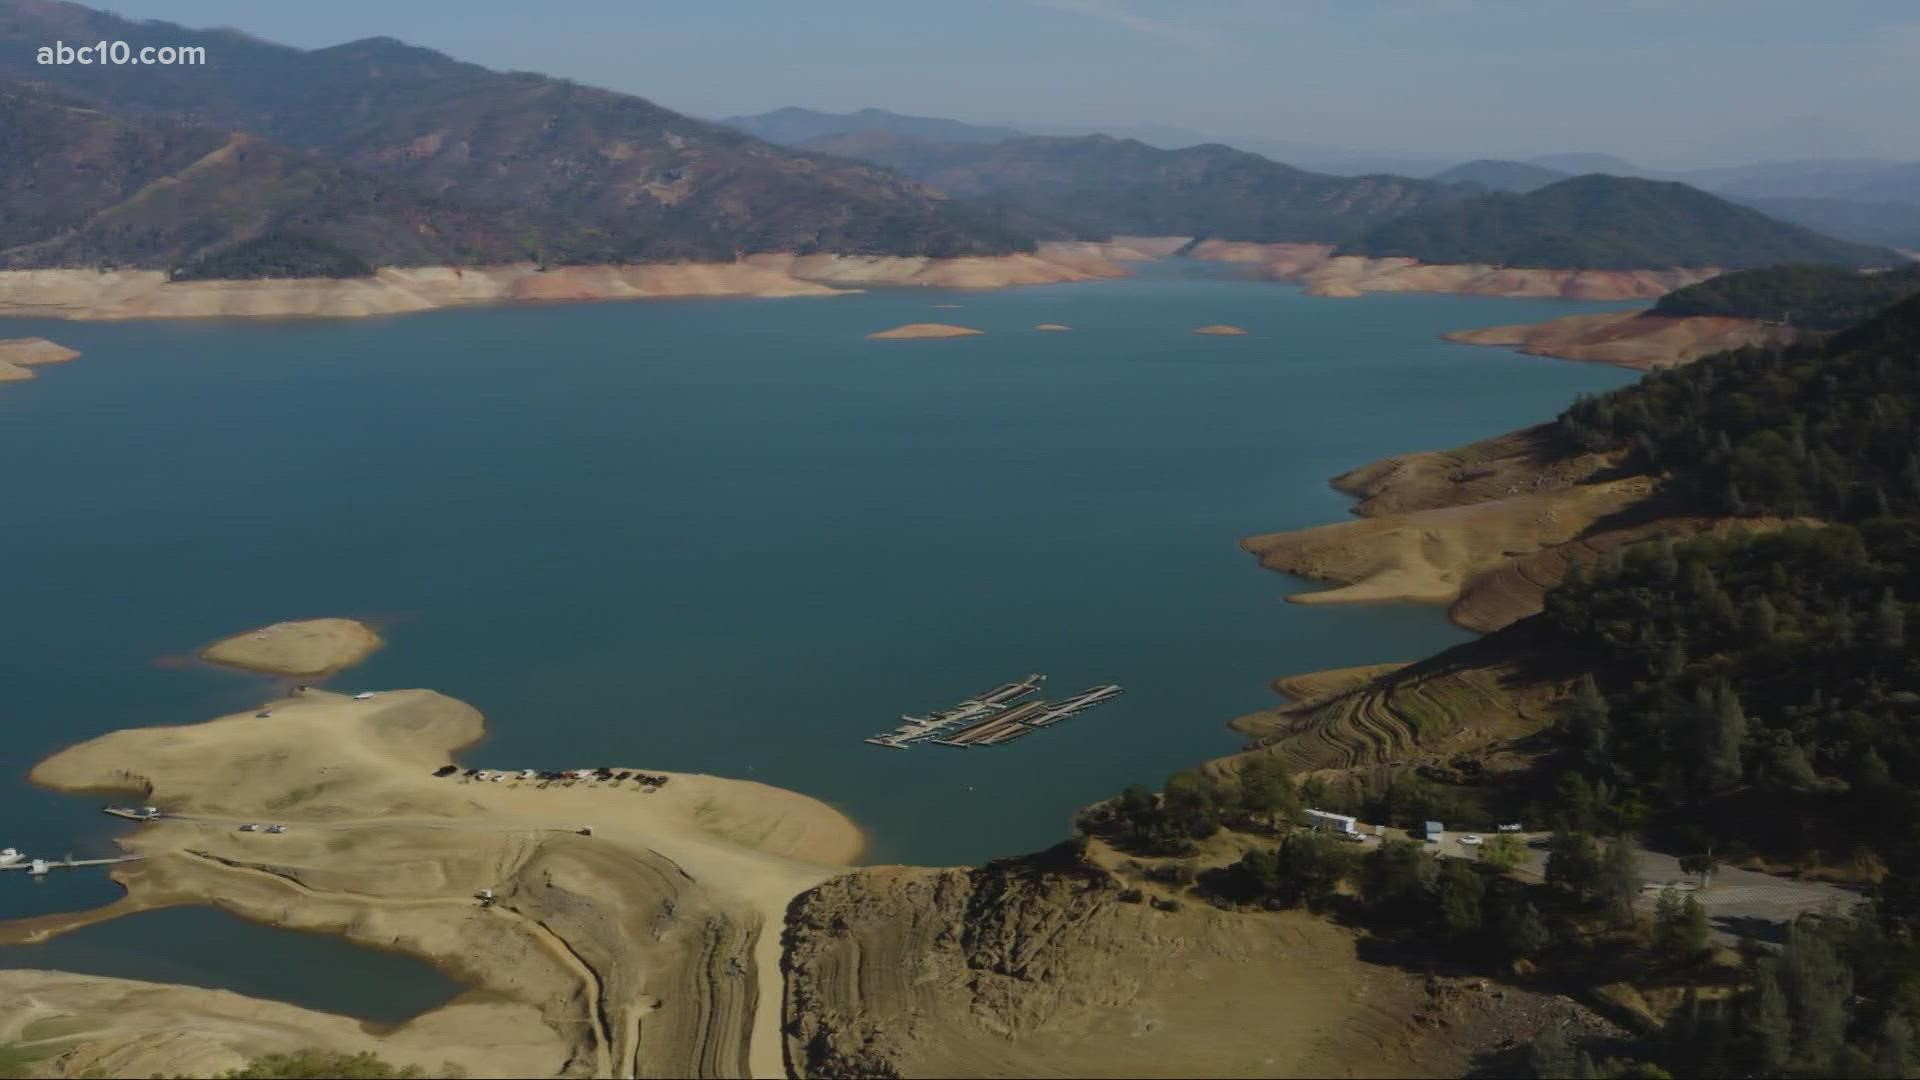 ABC10's Carley Gomez breaks down the state's drought conditions and latest reservoir levels.